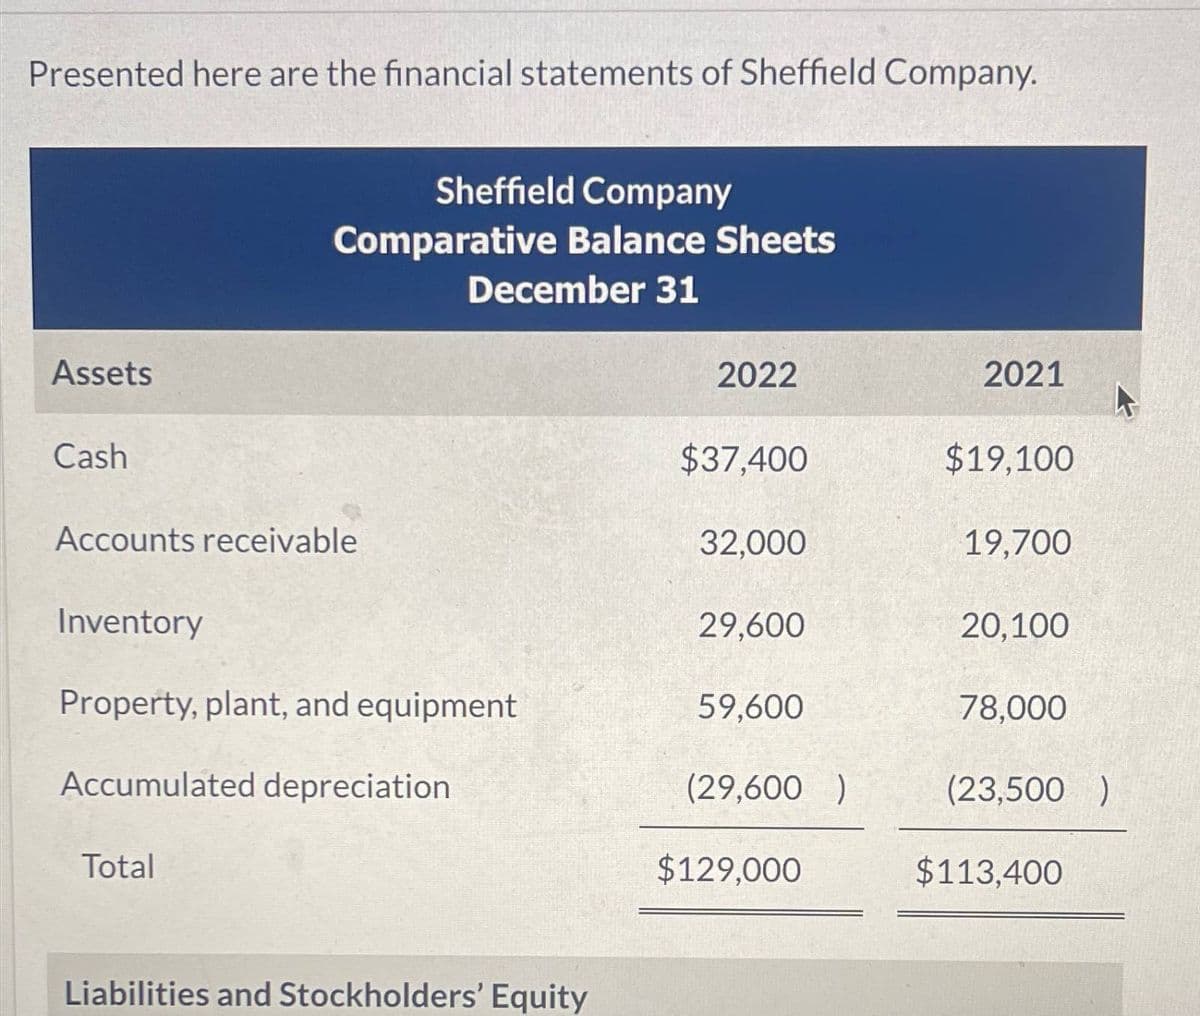 Presented here are the financial statements of Sheffield Company.
Sheffield Company
Comparative Balance Sheets
December 31
Assets
2022
2021
Cash
$37,400
$19,100
Accounts receivable
32,000
19,700
Inventory
29,600
20,100
Property, plant, and equipment
59,600
78,000
Accumulated depreciation
(29,600 )
(23,500 )
Total
$129,000
$113,400
Liabilities and Stockholders' Equity